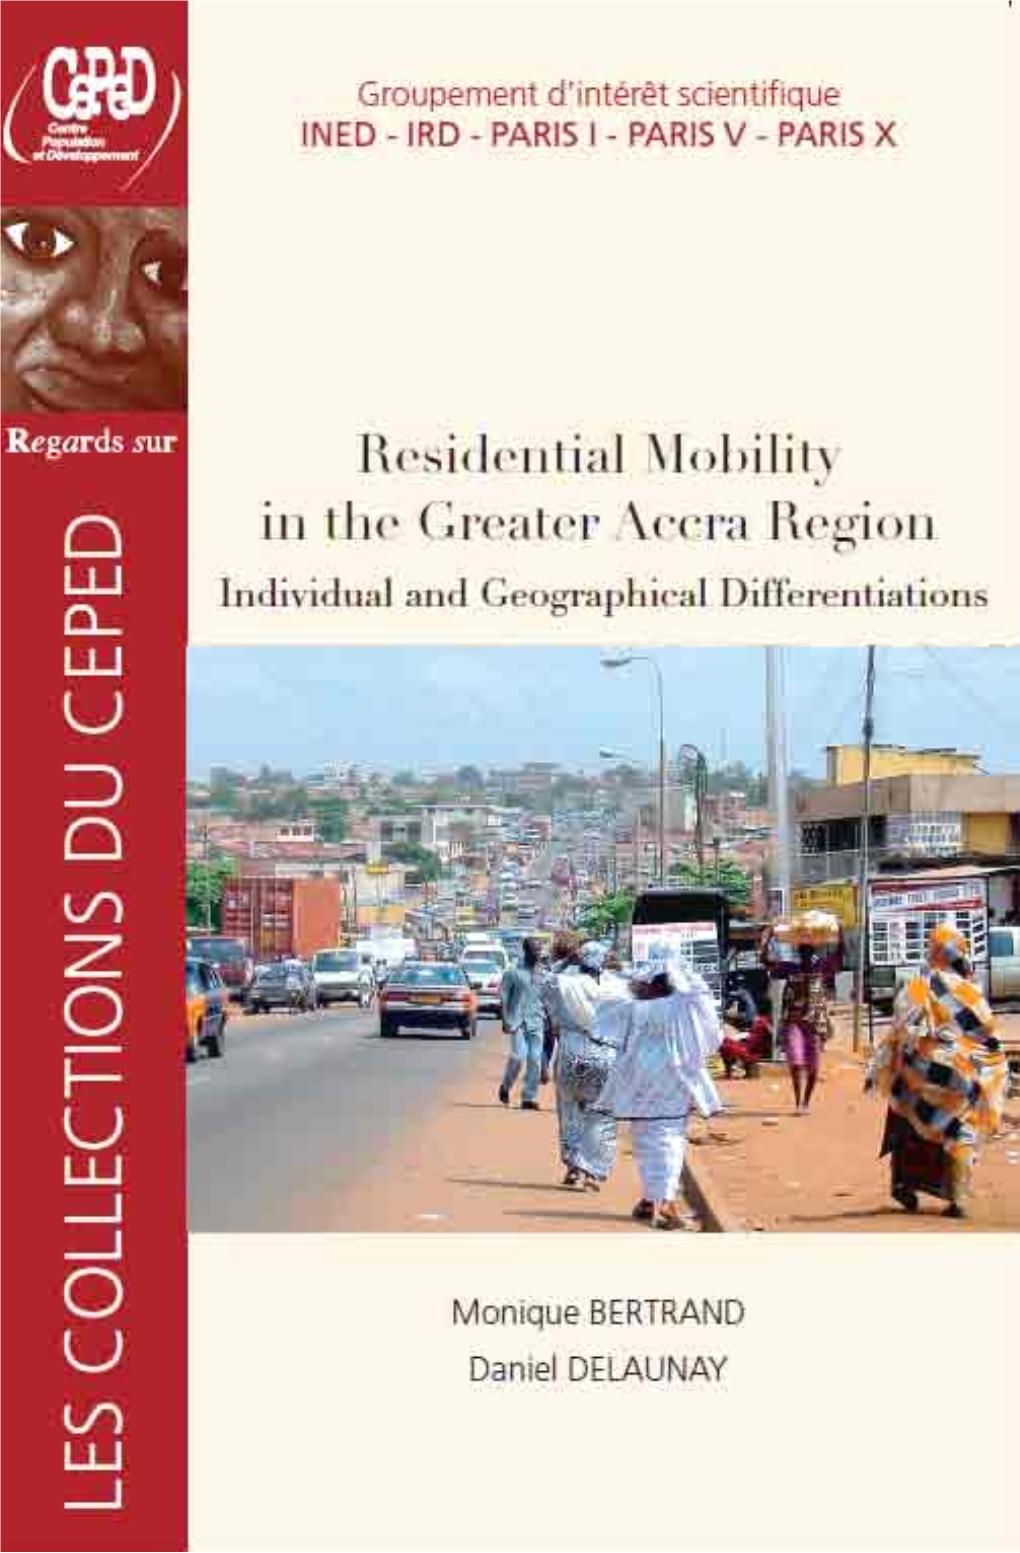 Residential Mobility in the Greater Accra Region